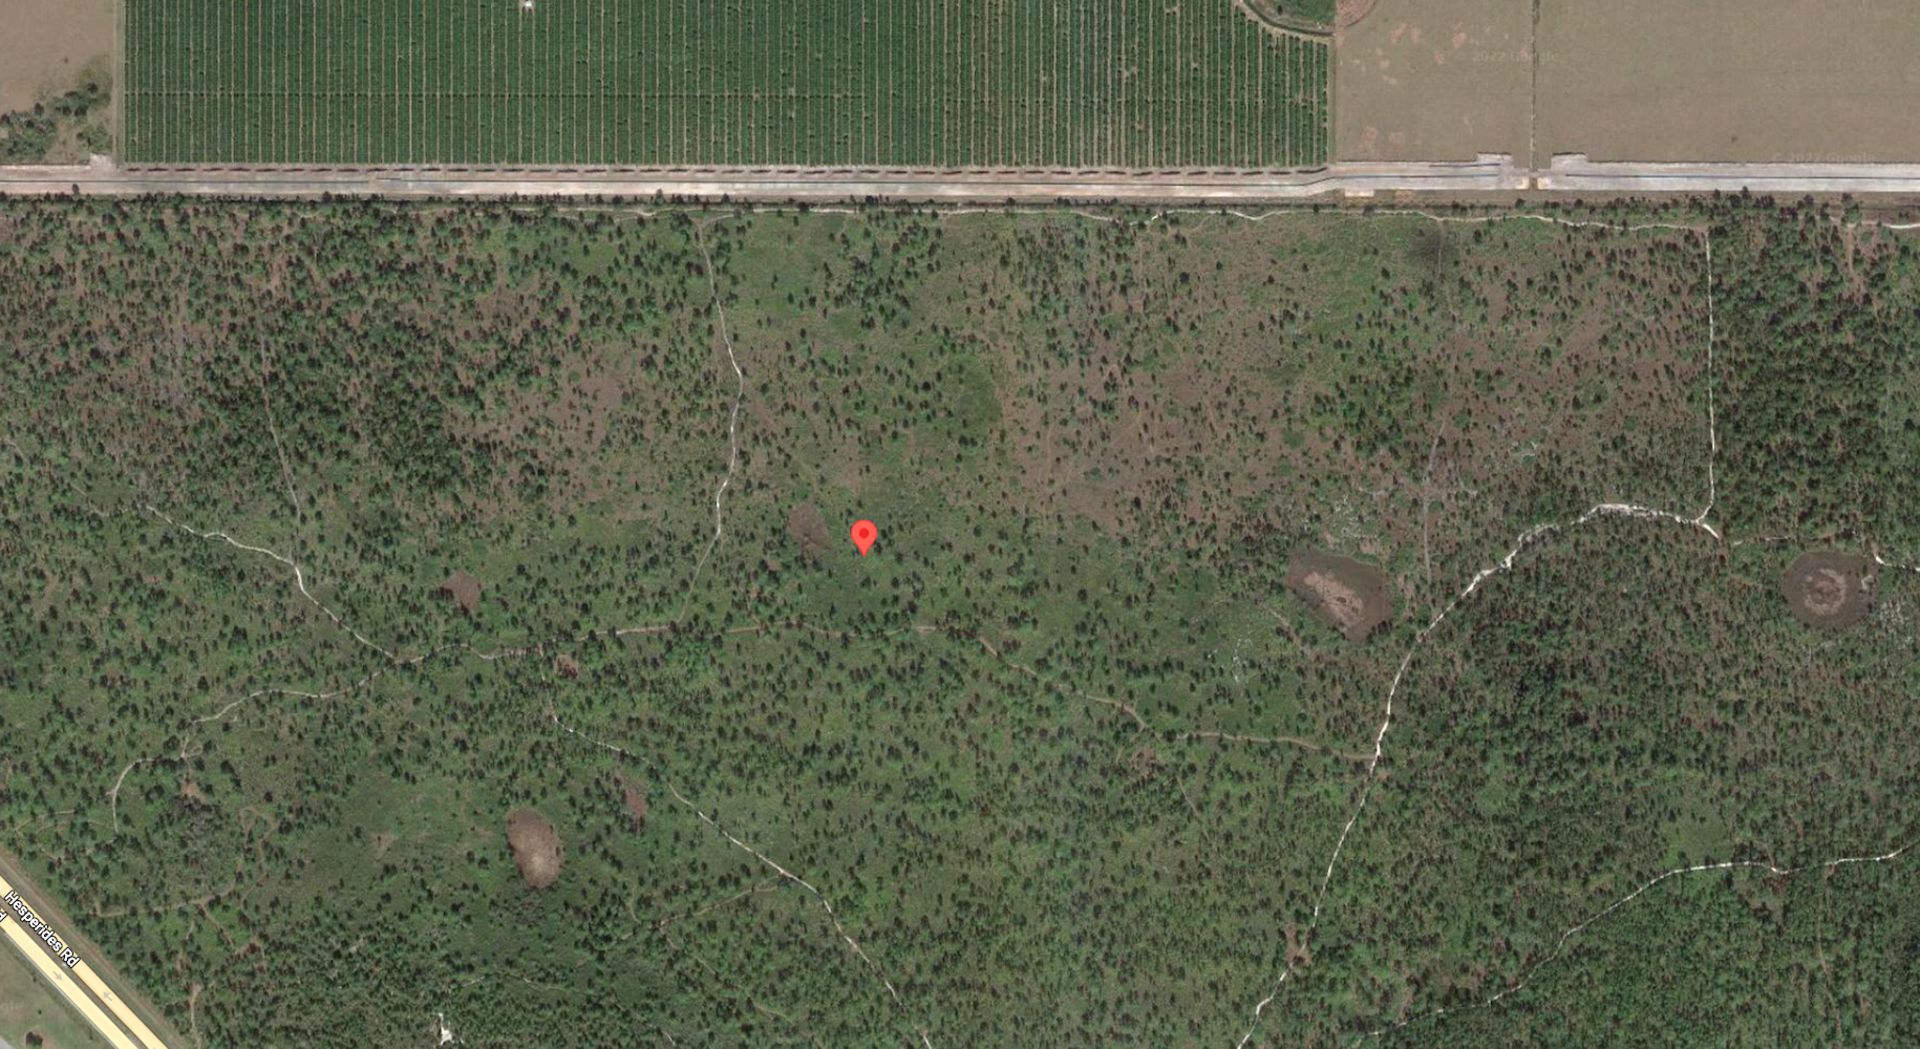 Almost 1.5 Acres + Surrounded by the Kissimmee Chain of Lakes in Sunny FL! - Image 7 of 12